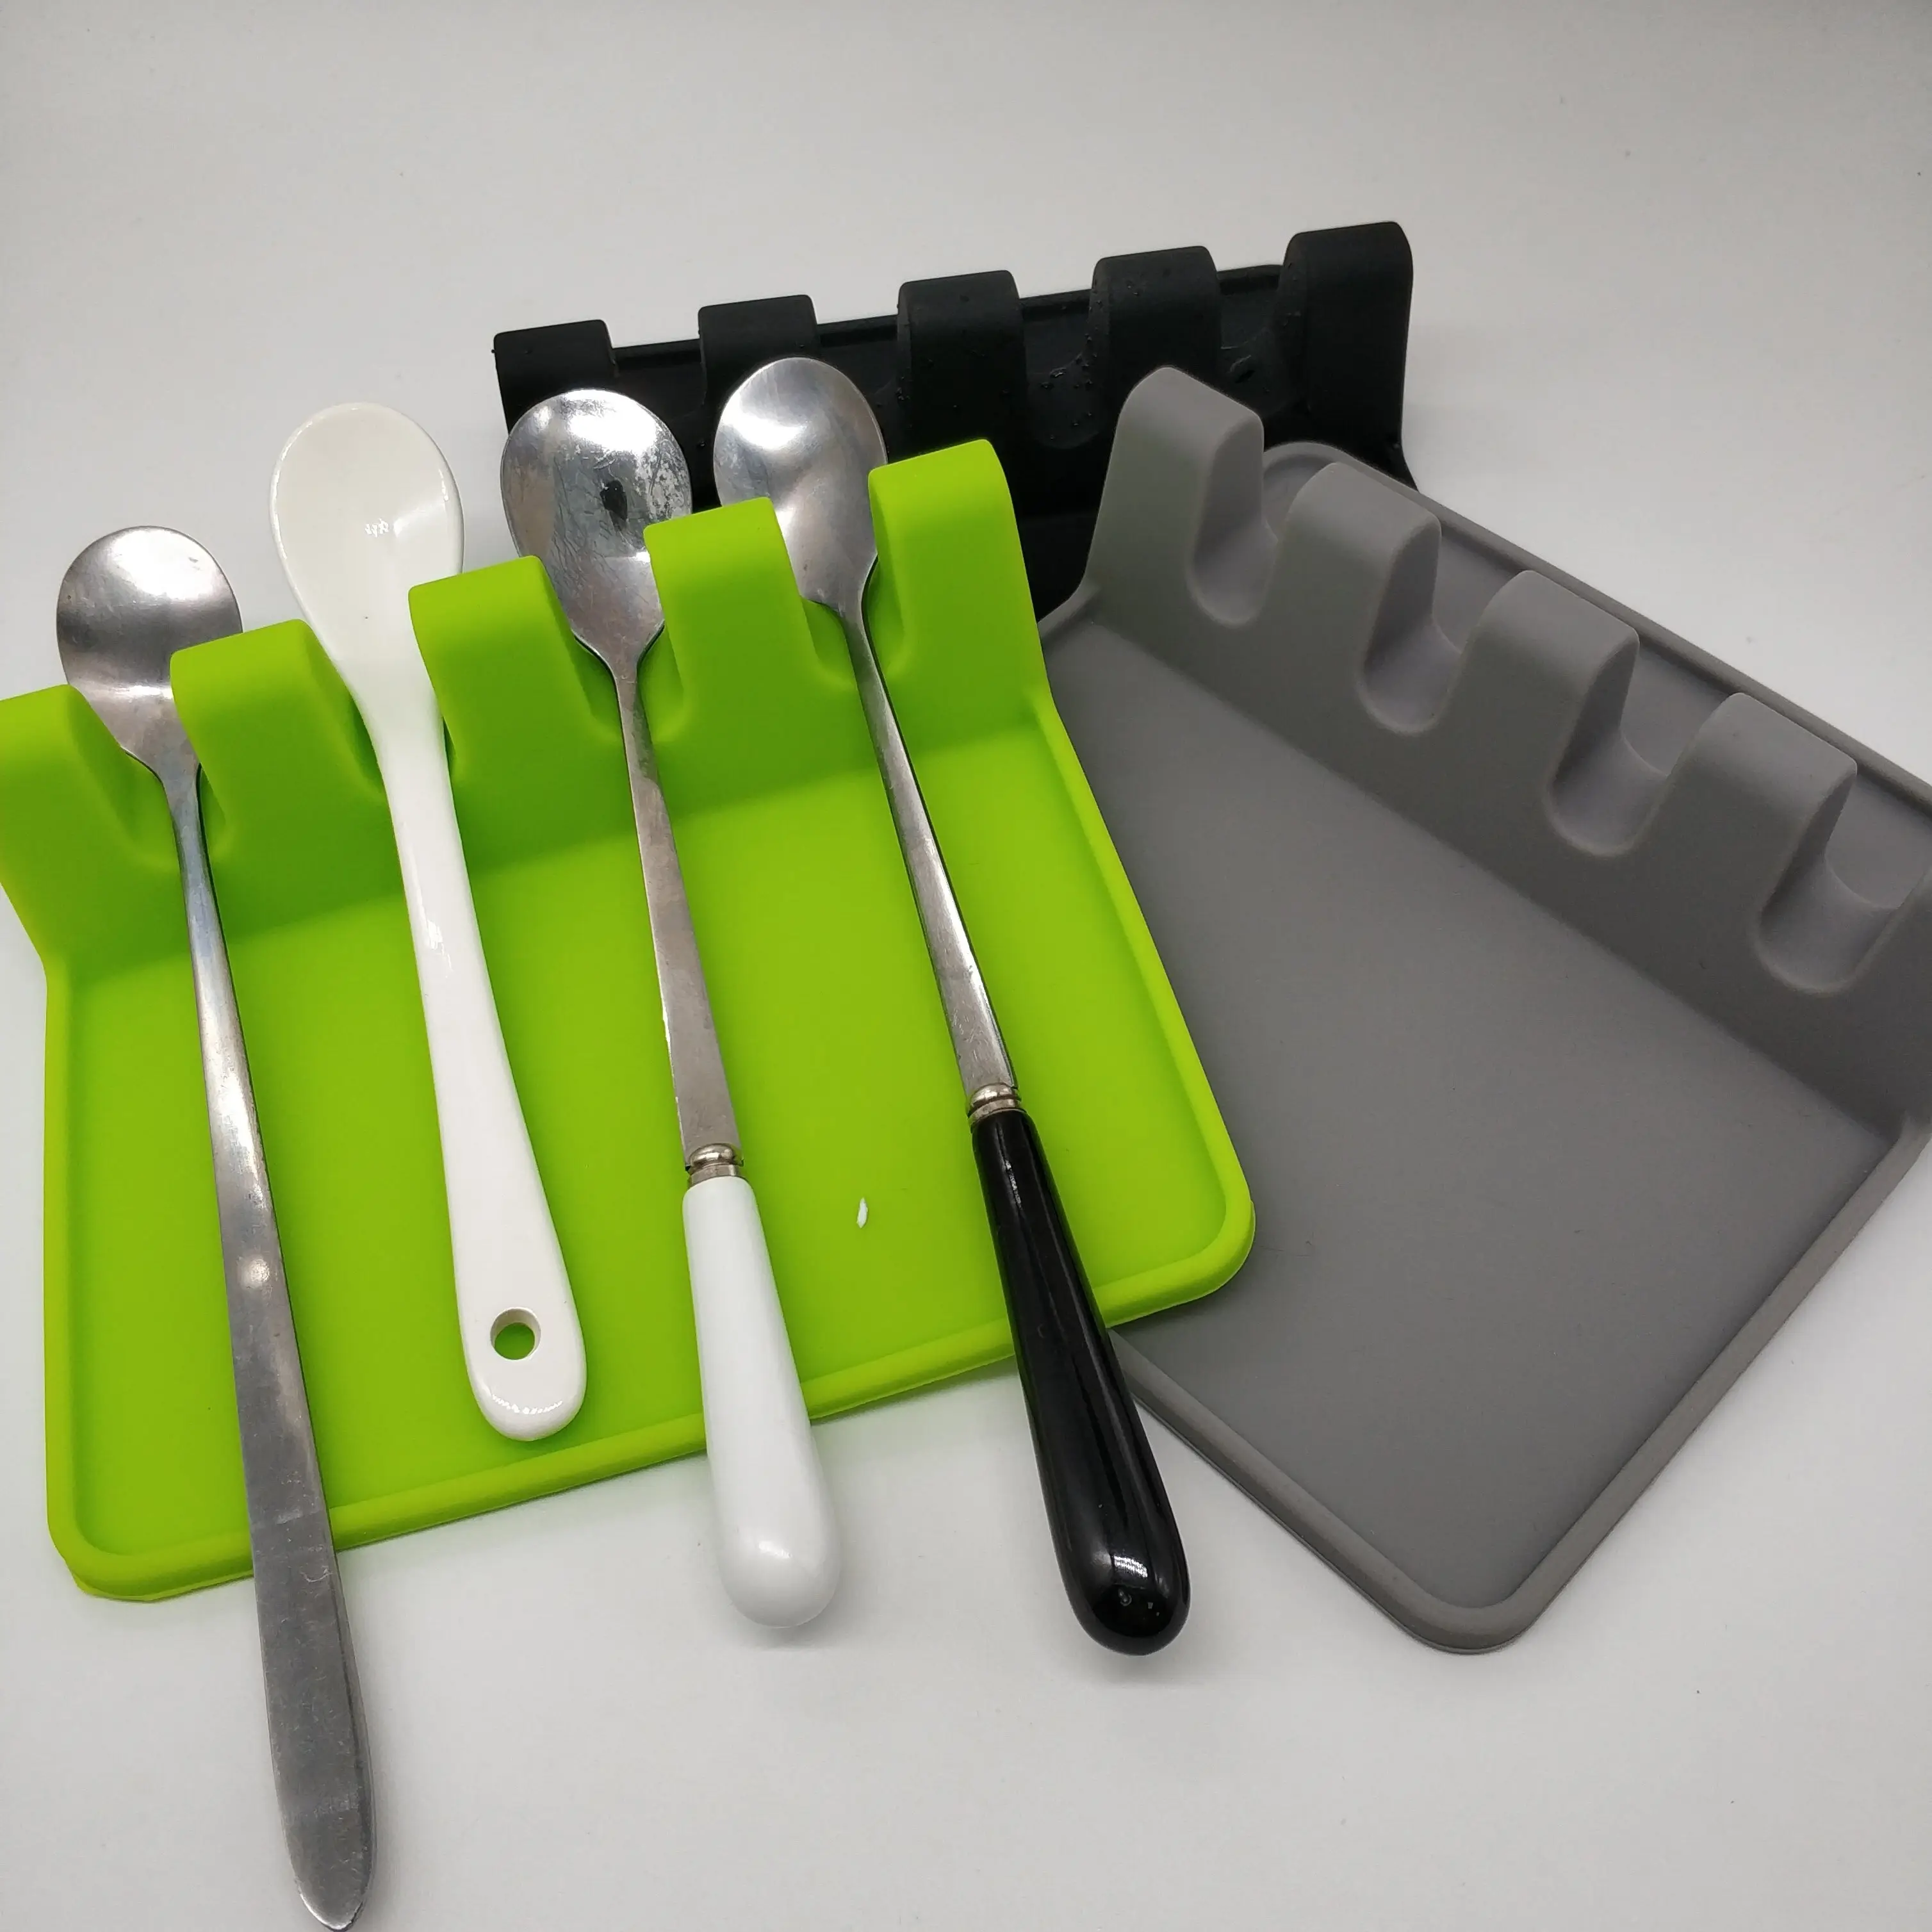 Convenient Silicone Utensil Rest With Drip Pad Storage Holder Rack For Multiple Utensils At Once